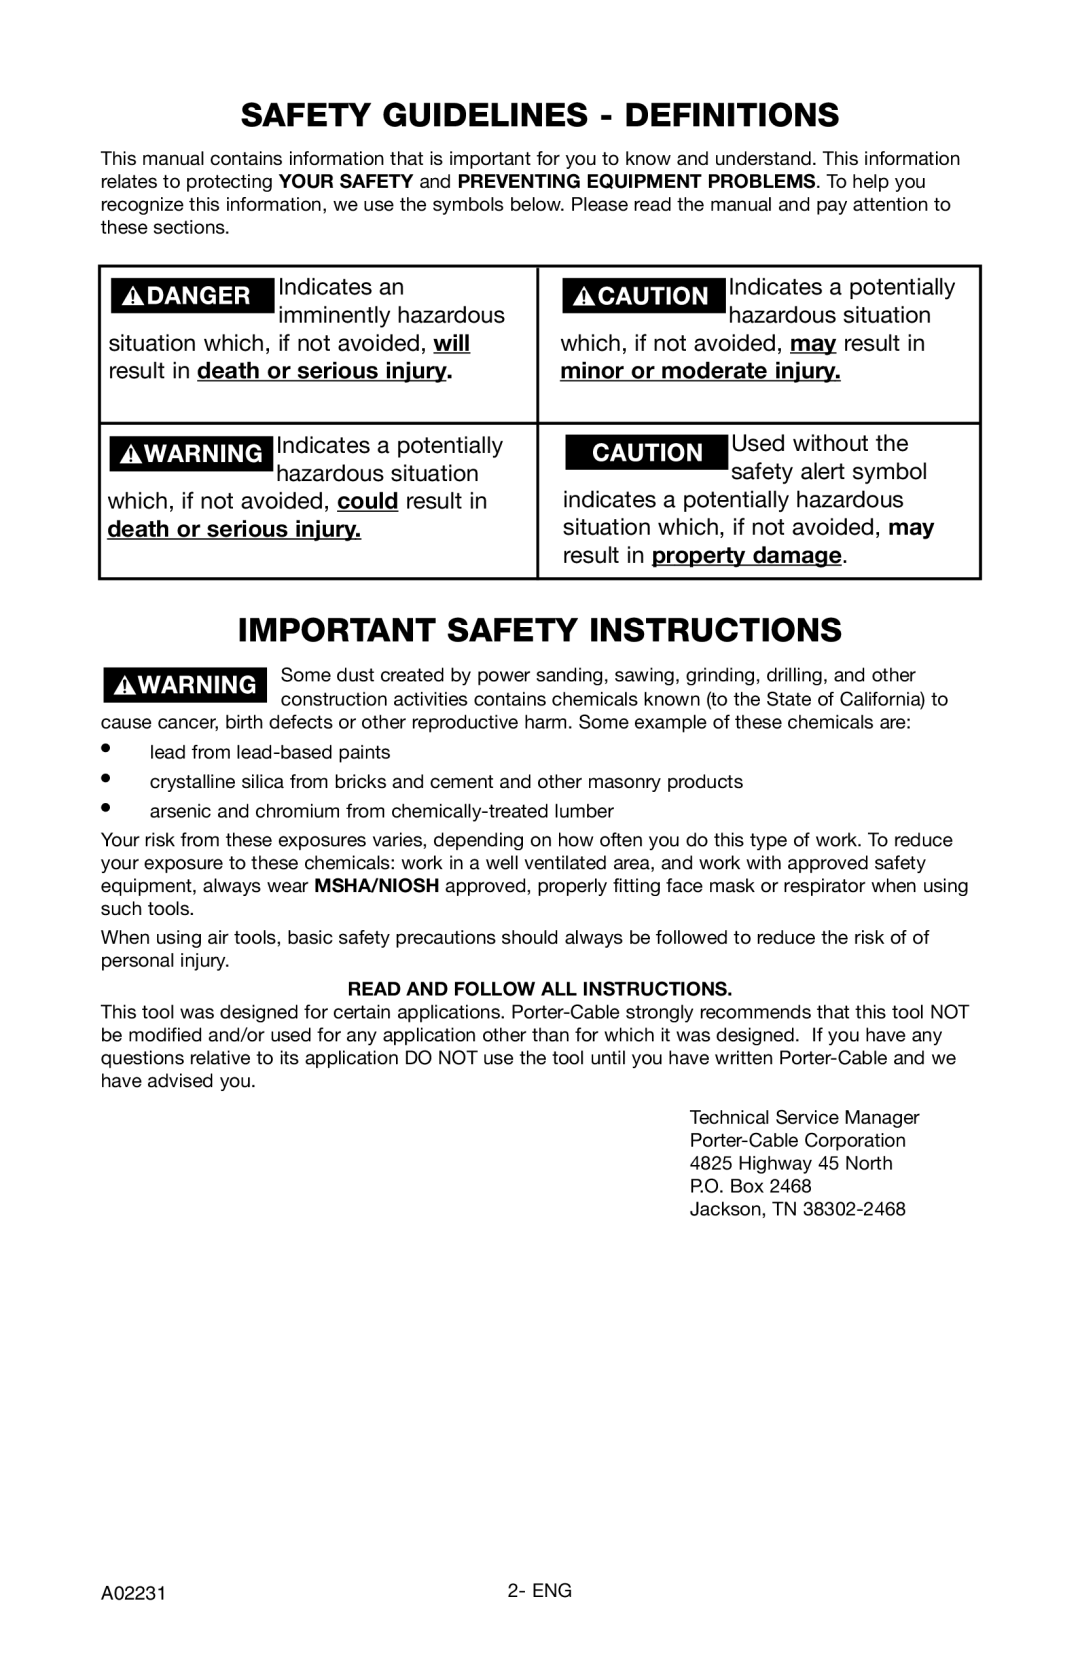 Porter-Cable CPLDC2540P Safety Guidelines - Definitions, Important Safety Instructions, result in death or serious injury 